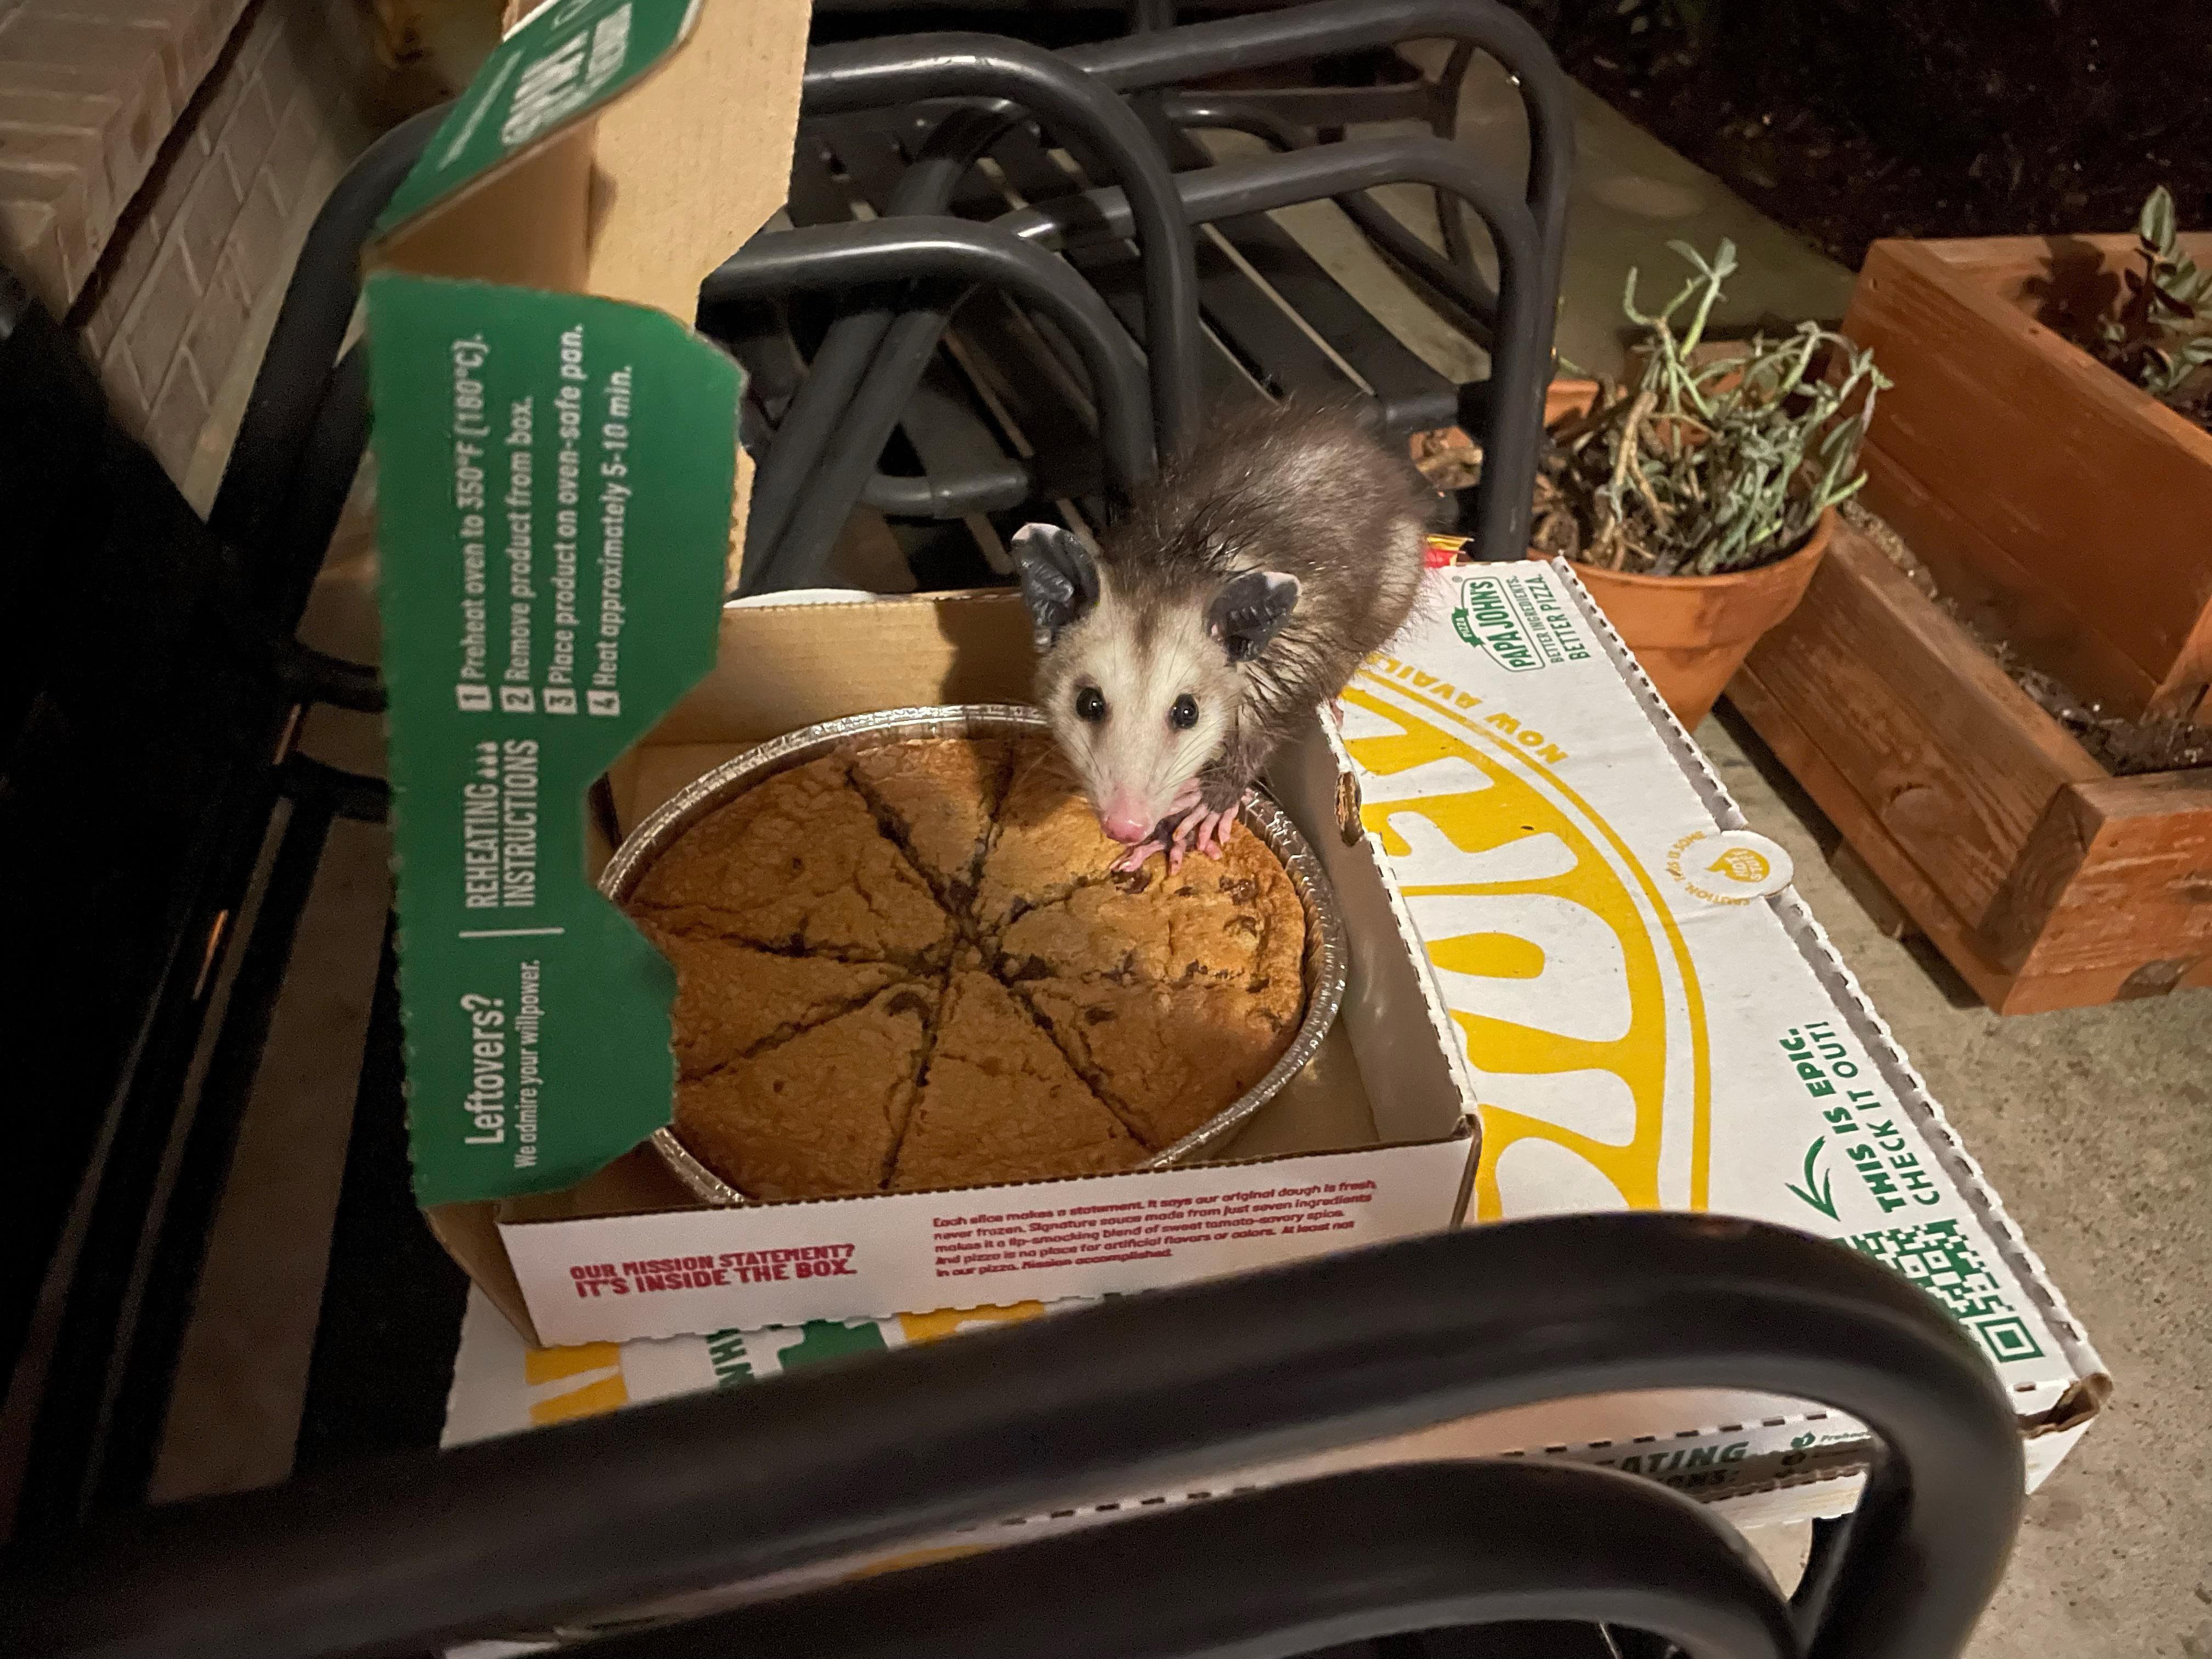 This little dude managed to open my pizza delivery within 20 seconds of delivery drop off.